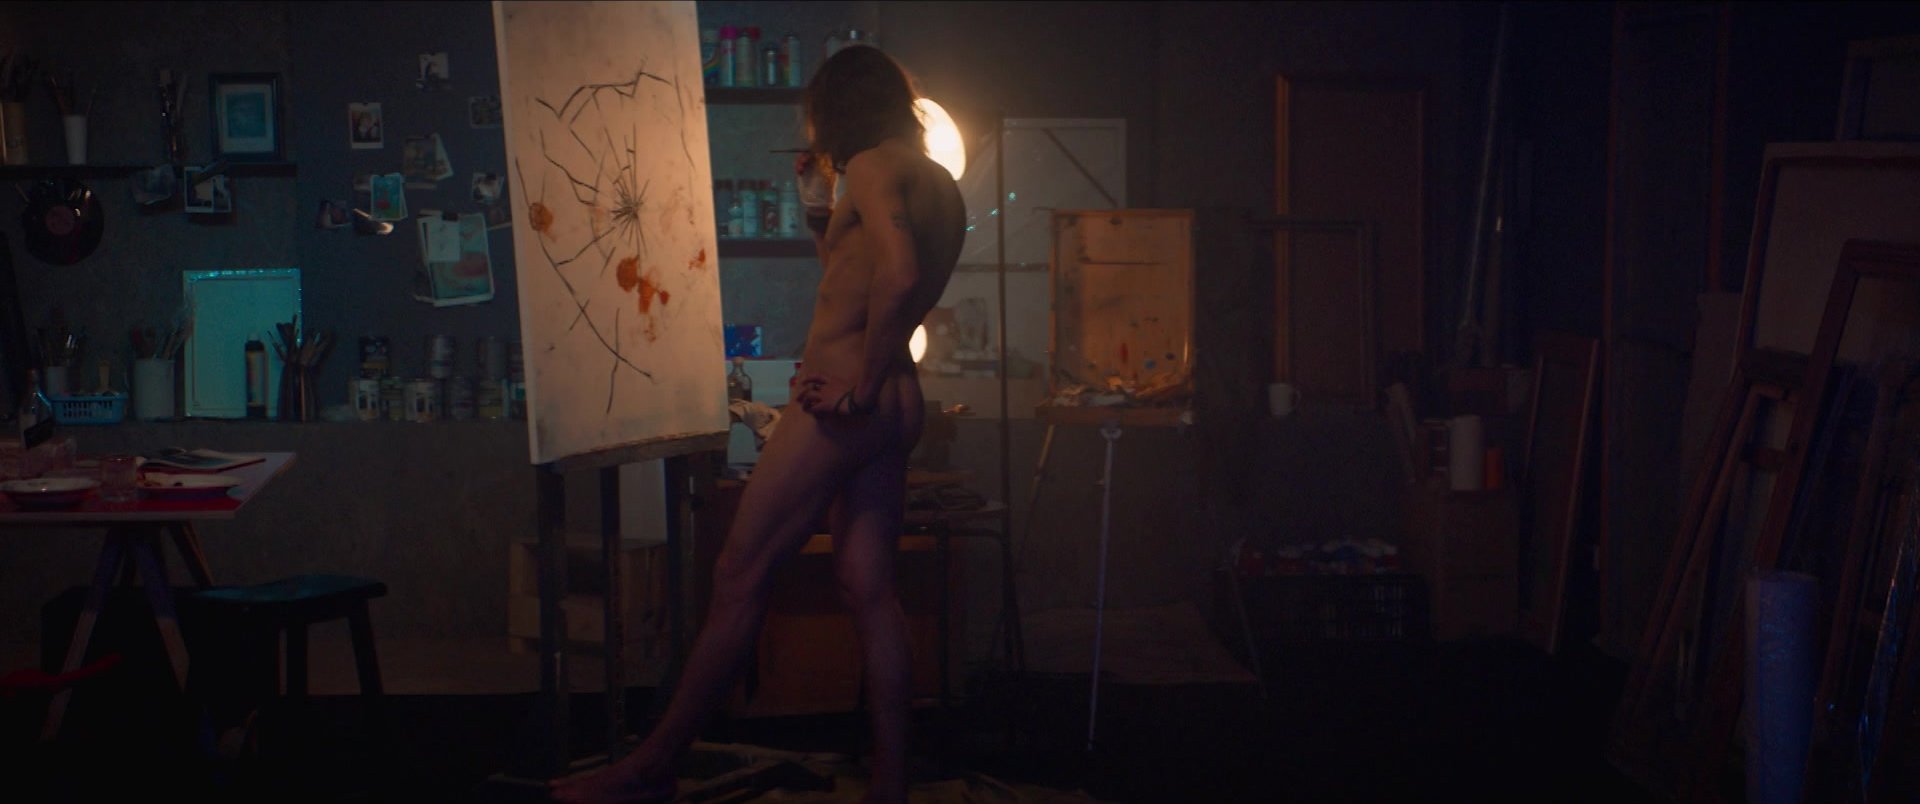 PAINTING NAKED AFTER SEX